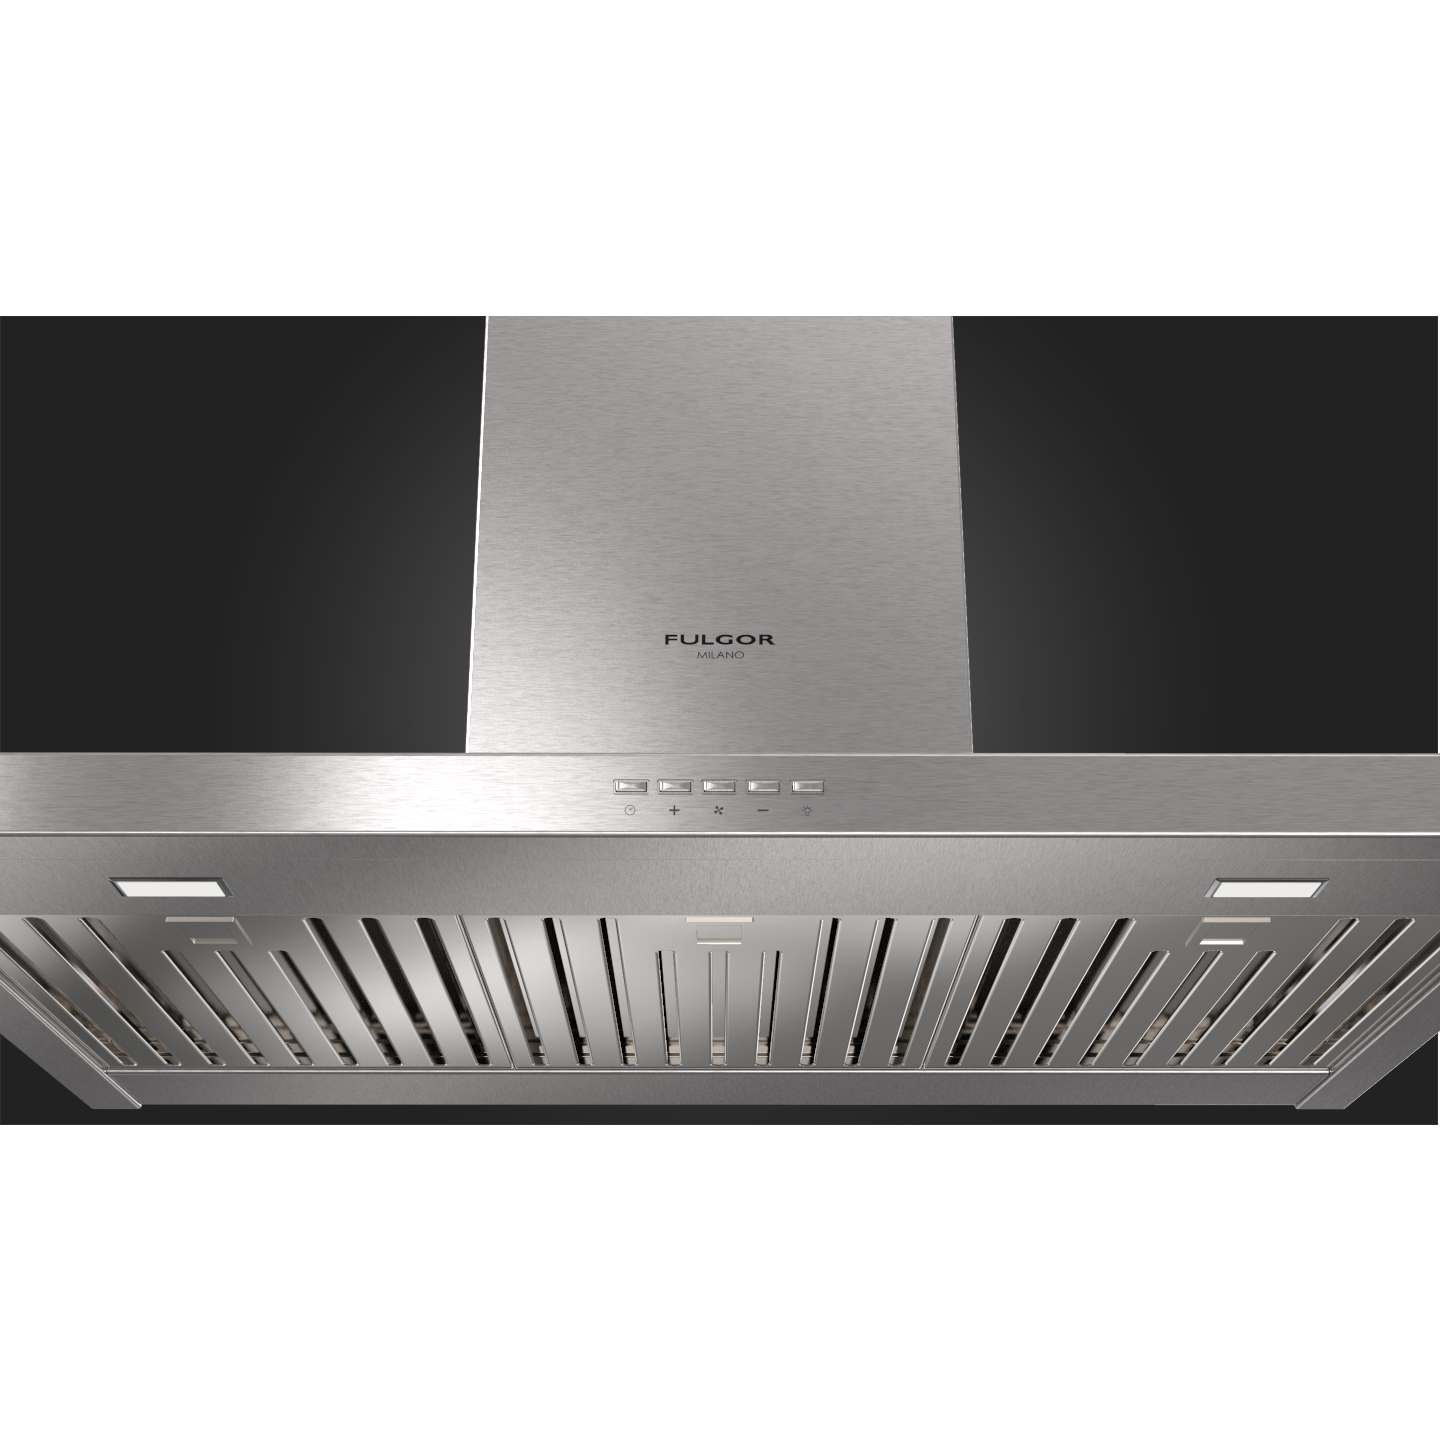 Fulgor Milano 30" Chimney Wall Mount Range Hood with 4-Speeds, Stainless Steel - F4CW30S1